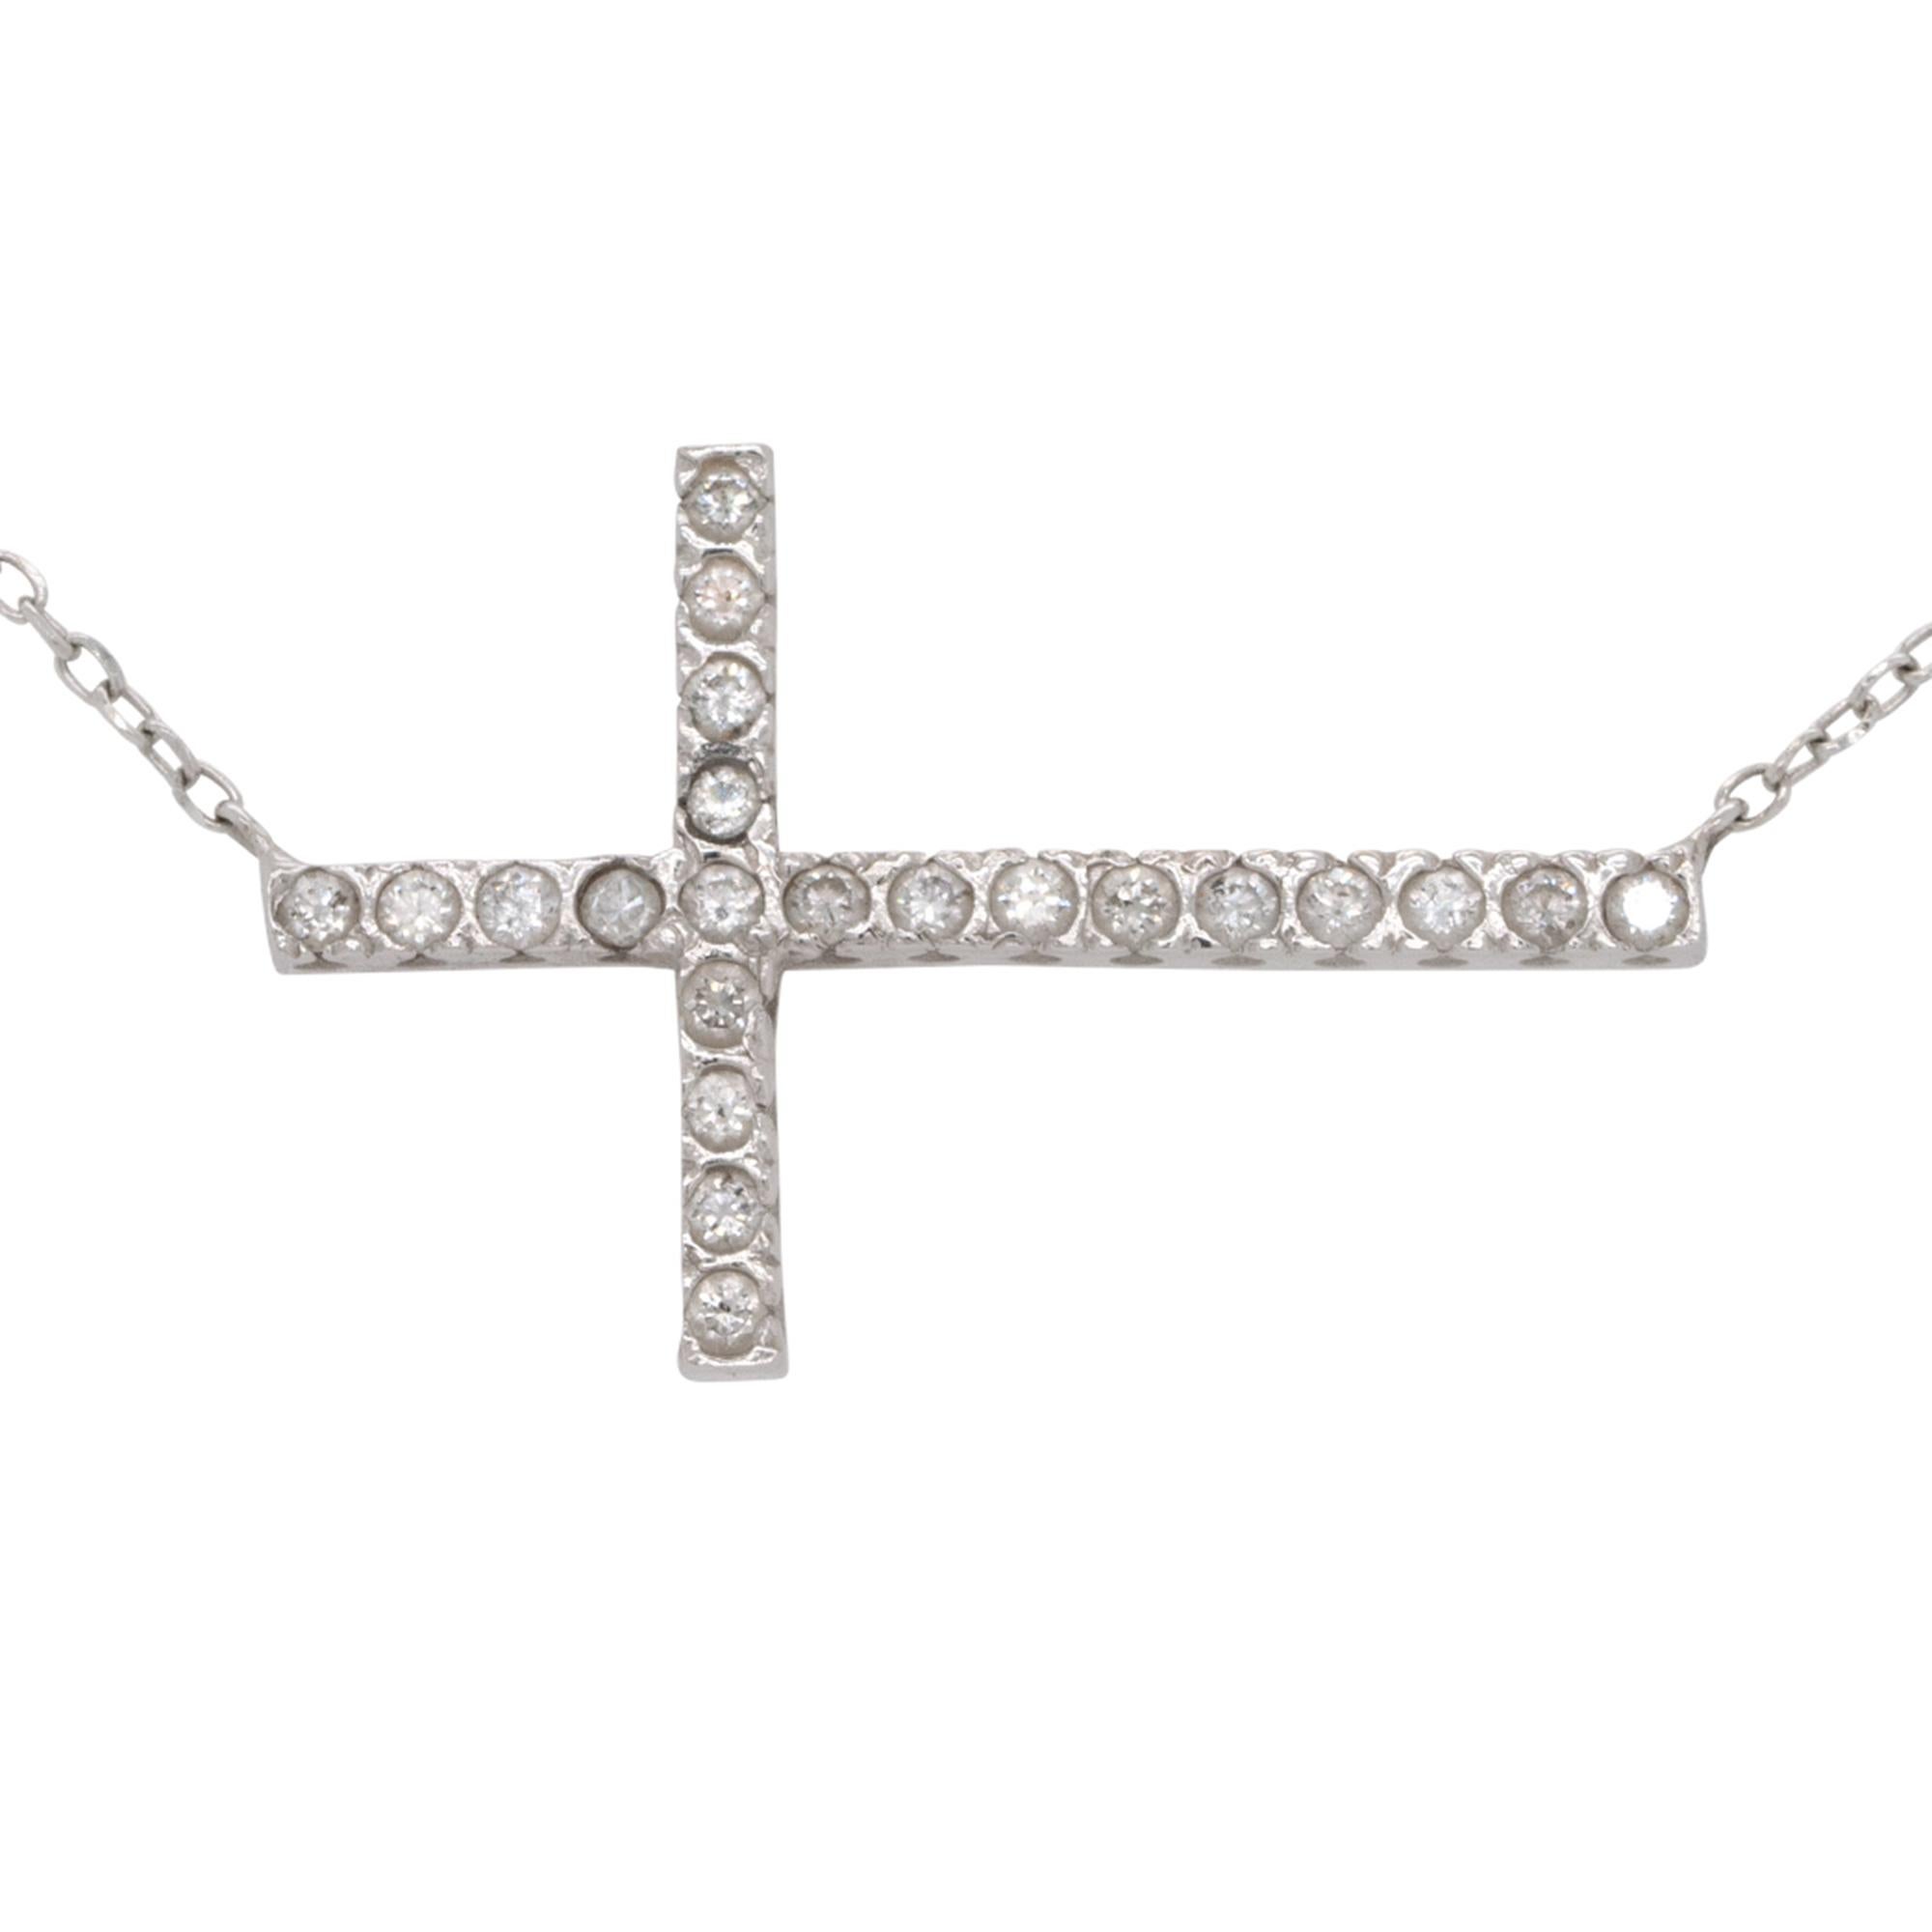 Material: 14k white gold
Diamond Details: Approx 0.19ctw of Round cut Diamonds. Diamonds are G/H in color and VS in clarity. 22 stones
Pendant Measurements: 22m x 1.80mm x 13.70mm Necklace is 16